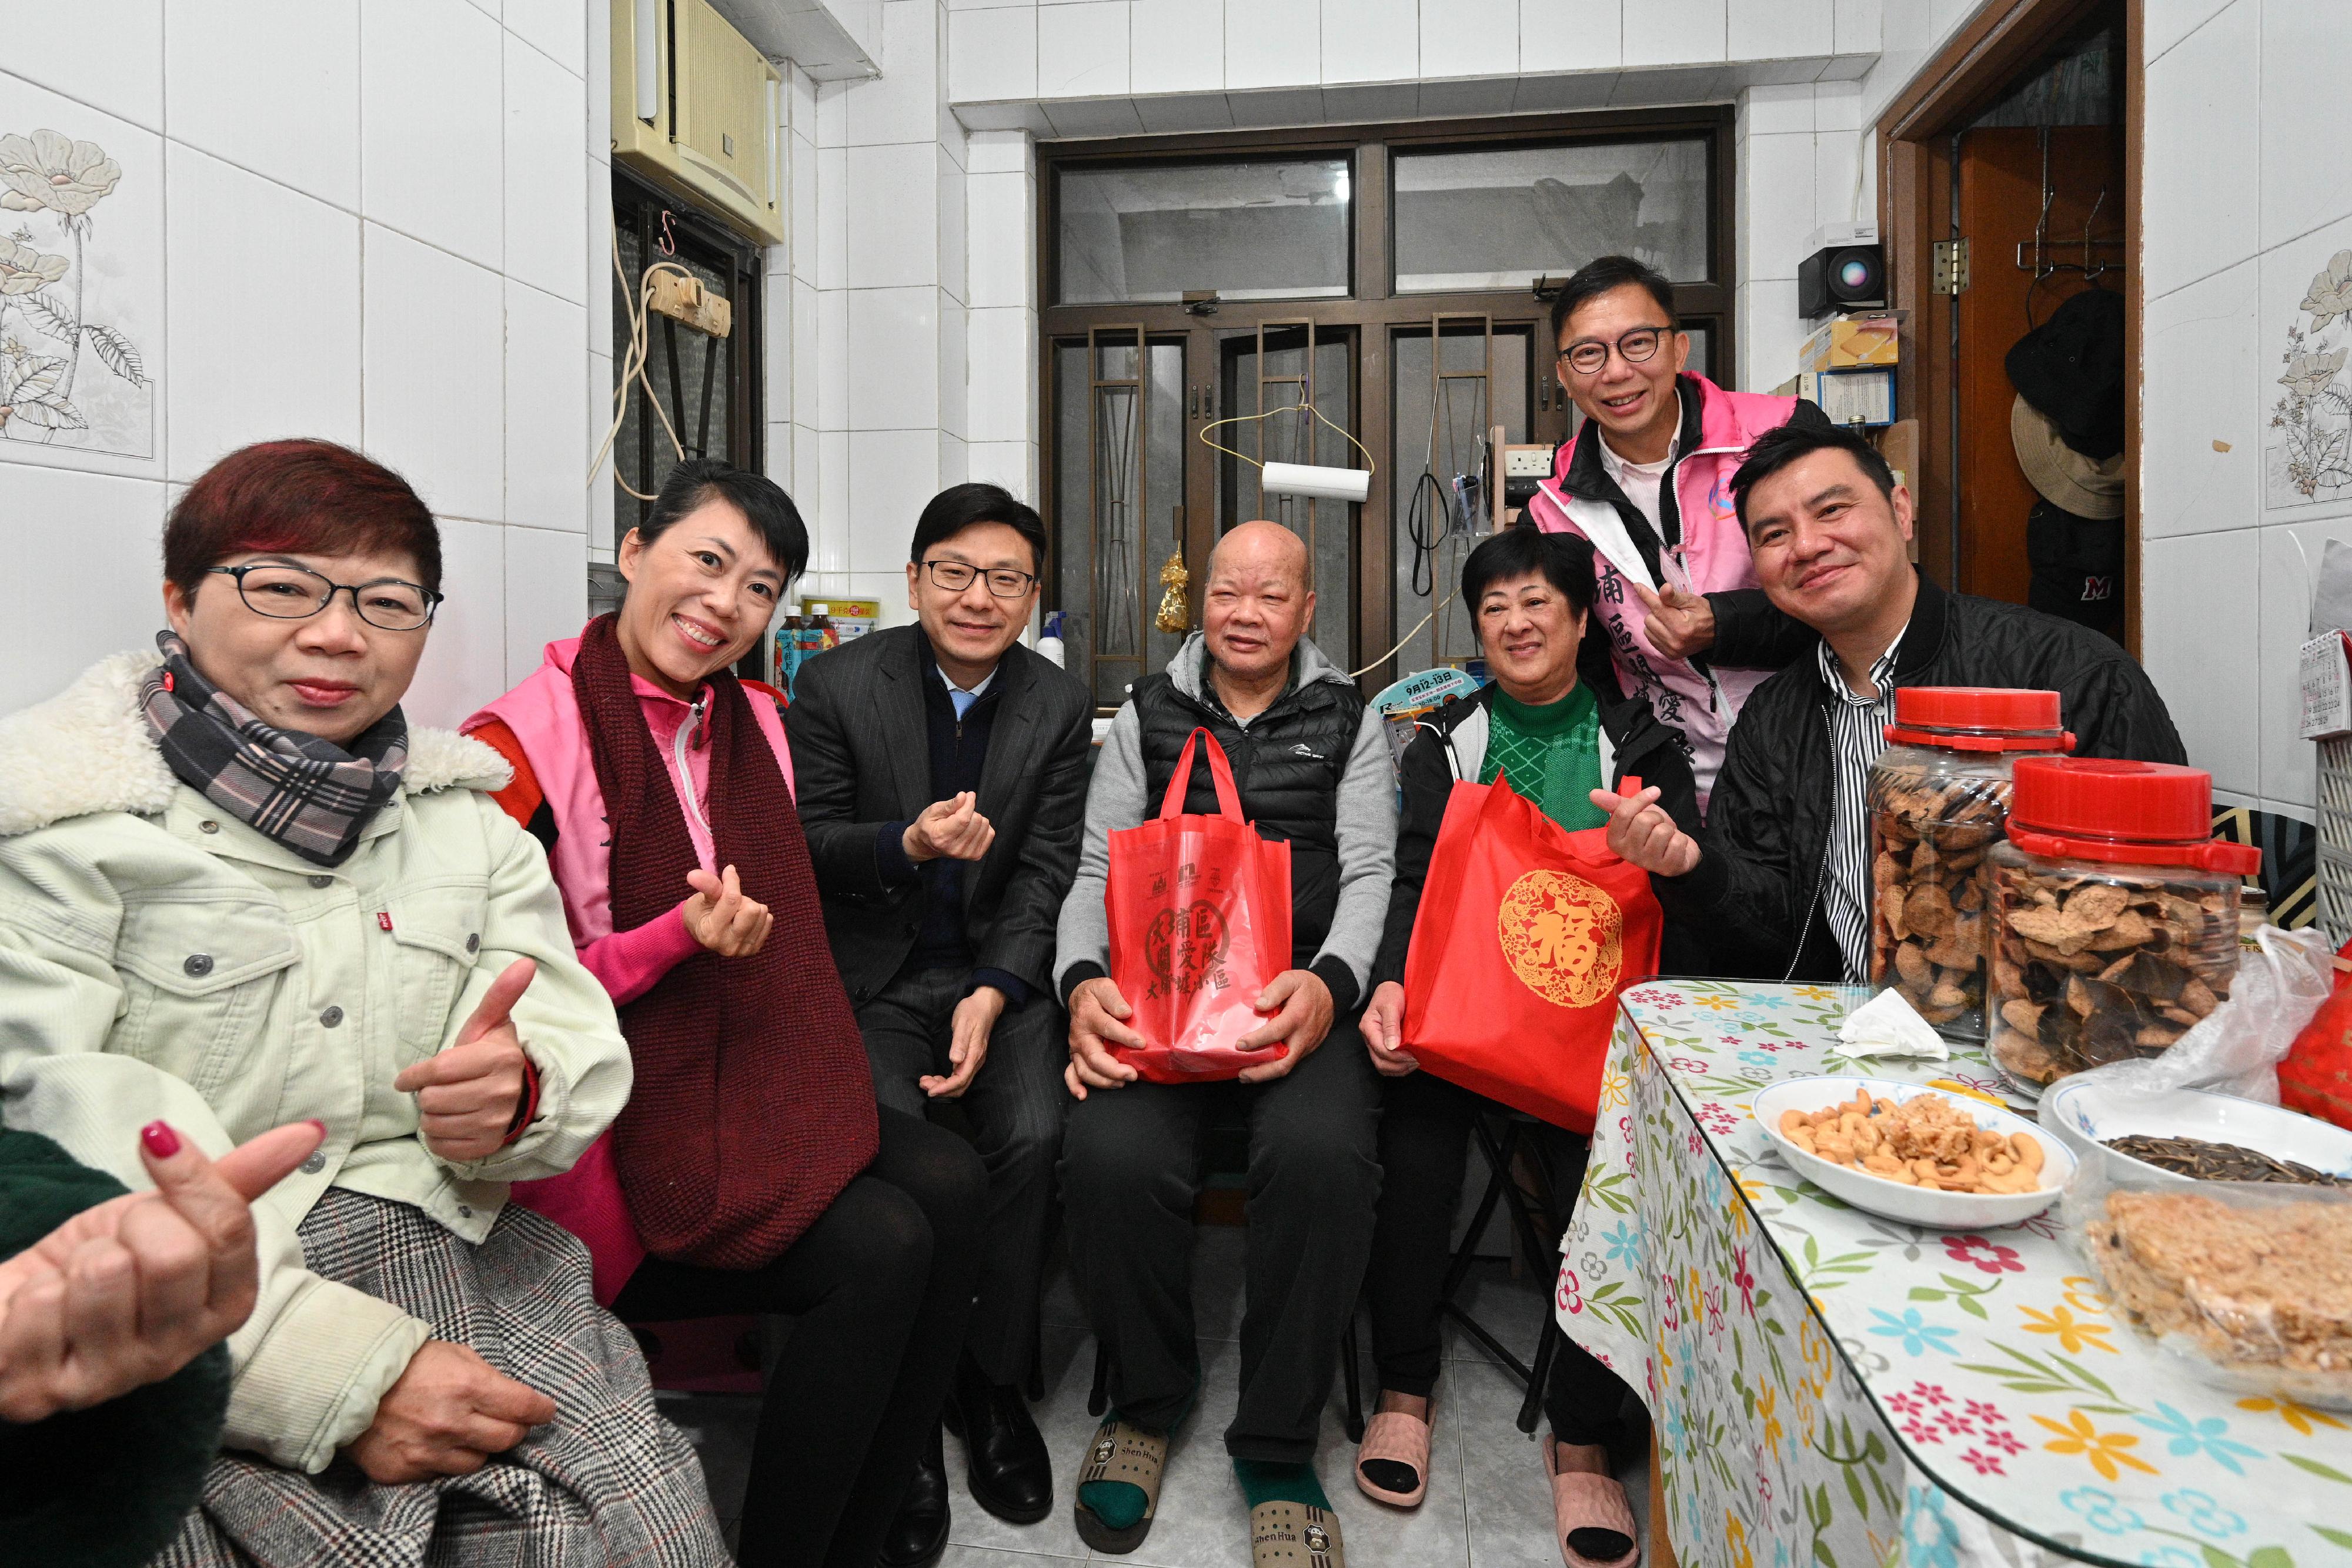 The Secretary for Labour and Welfare, Mr Chris Sun, visited Tai Po District this afternoon (February 8) as part of the year-end caring visits in 18 districts. Photo shows Mr Sun (third left), accompanied by the District Officer (Tai Po), Ms Eunice Chan (second left), during his visit to an elderly couple living in the vicinity of Tai Po Market to distribute blessing bags in celebration of the Chinese New Year, together with Tai Po District Council members and representatives from the Care Team (Tai Po). Mr Sun extended early Chinese New Year greetings to the elderly people and reminded them to stay warm in cold weather. Members of the public and neighbours are encouraged to show concern and care for the health of singleton elderly or frail elderly persons.